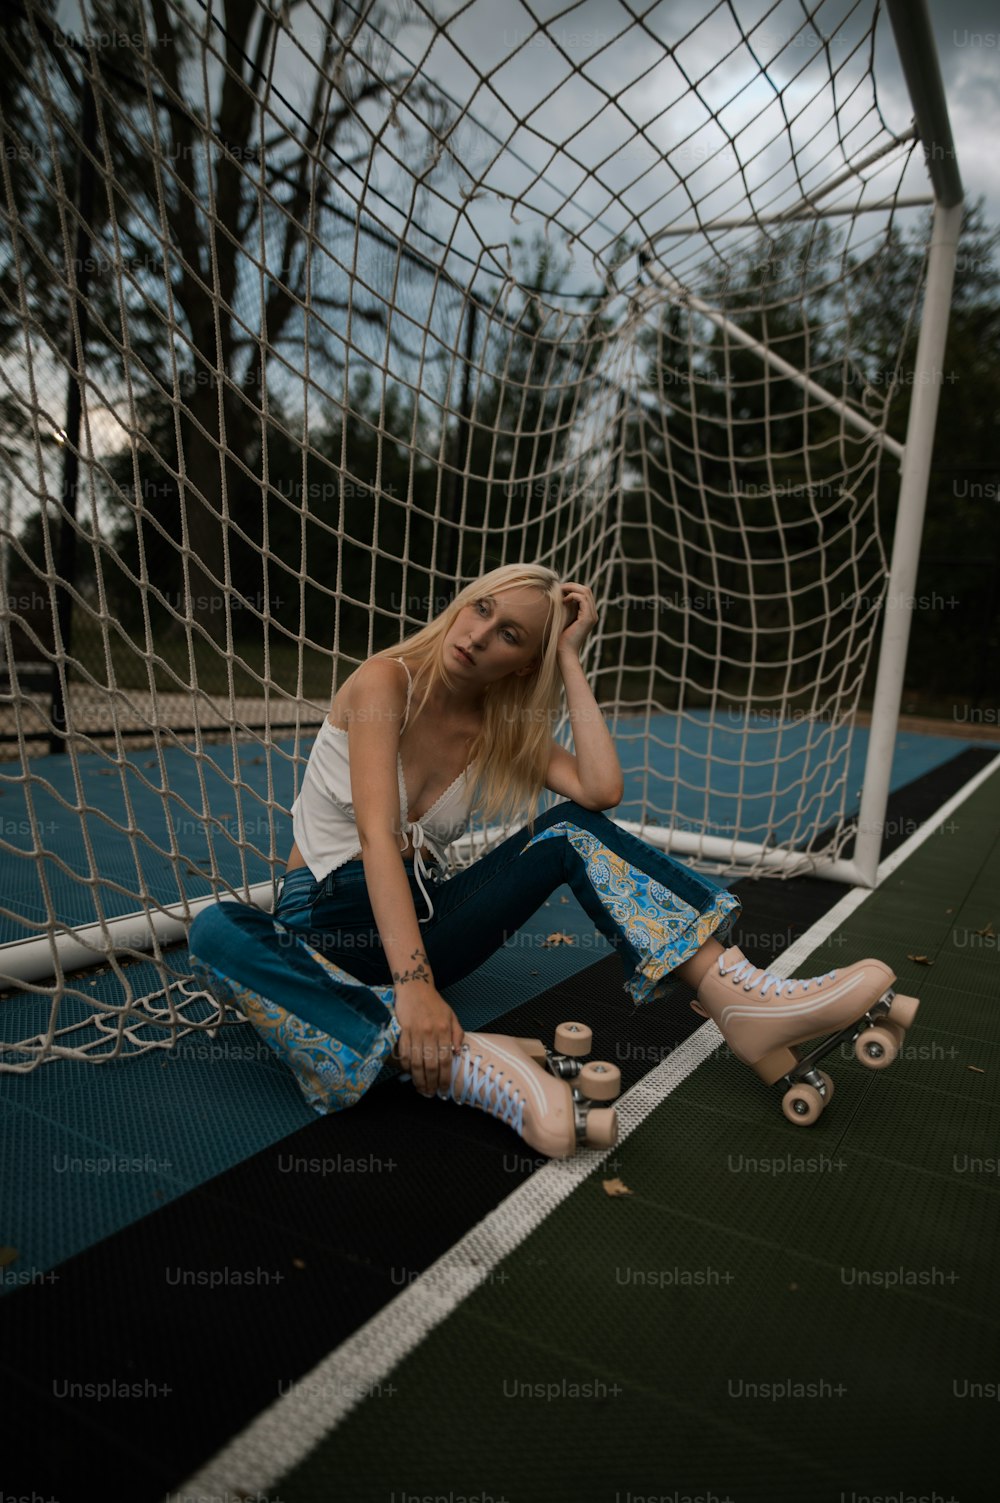 a woman sitting on the ground next to a soccer goal